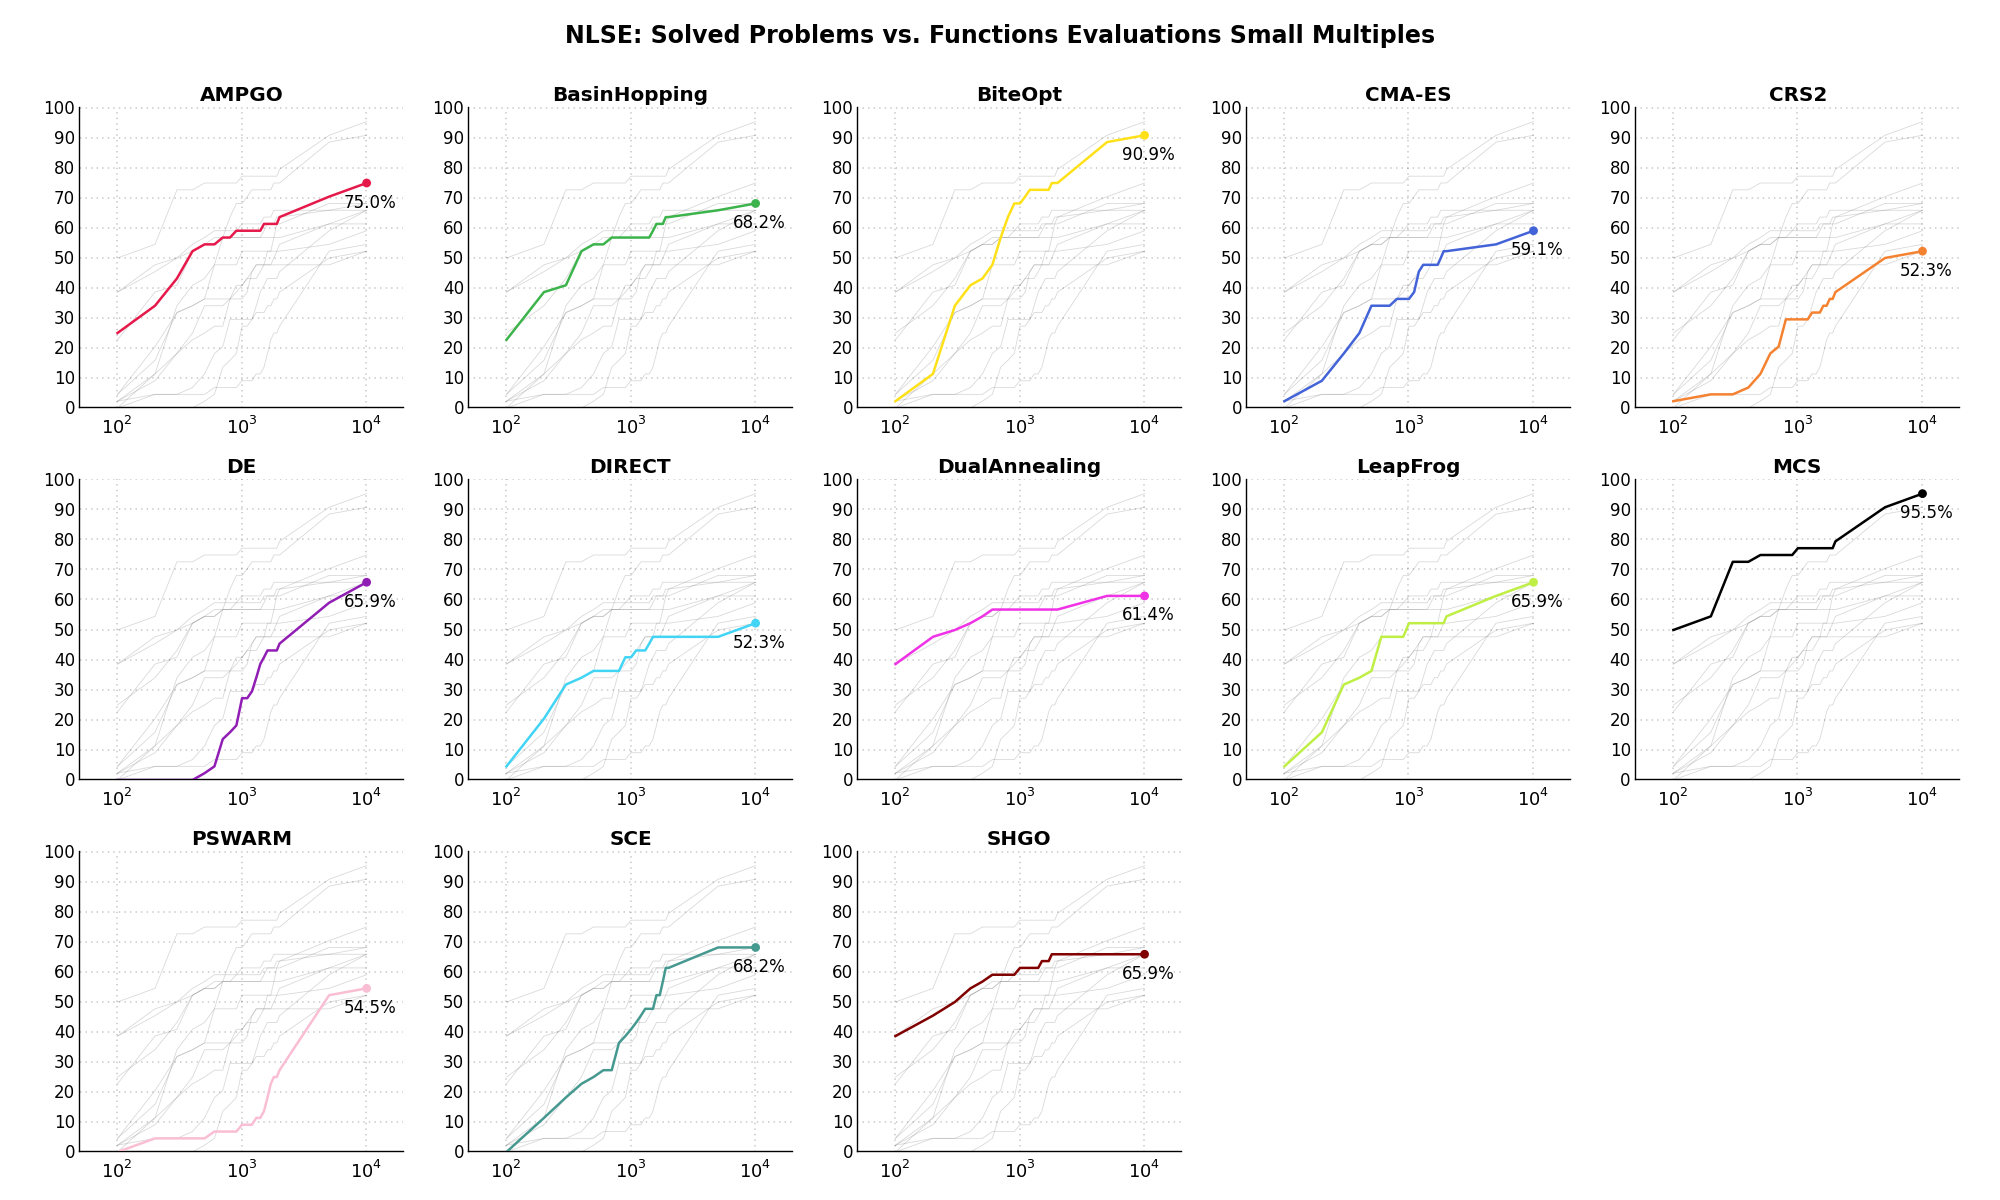 Percentage of problems solved given a fixed number of function evaluations on the NLSE test suite